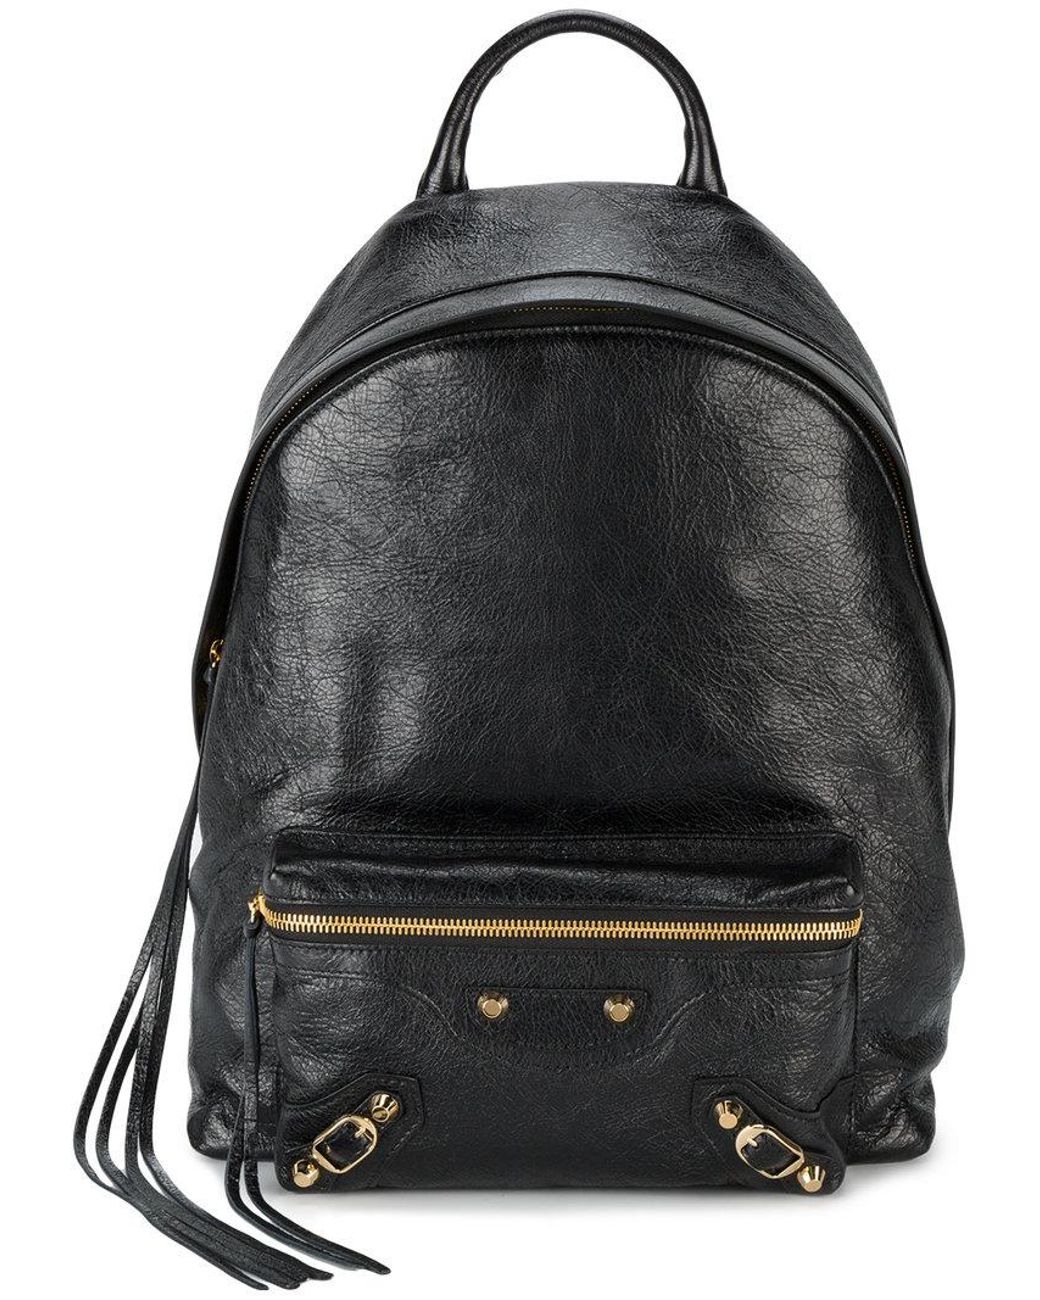 Balenciaga Leather Classic City Backpack in Black | Lyst